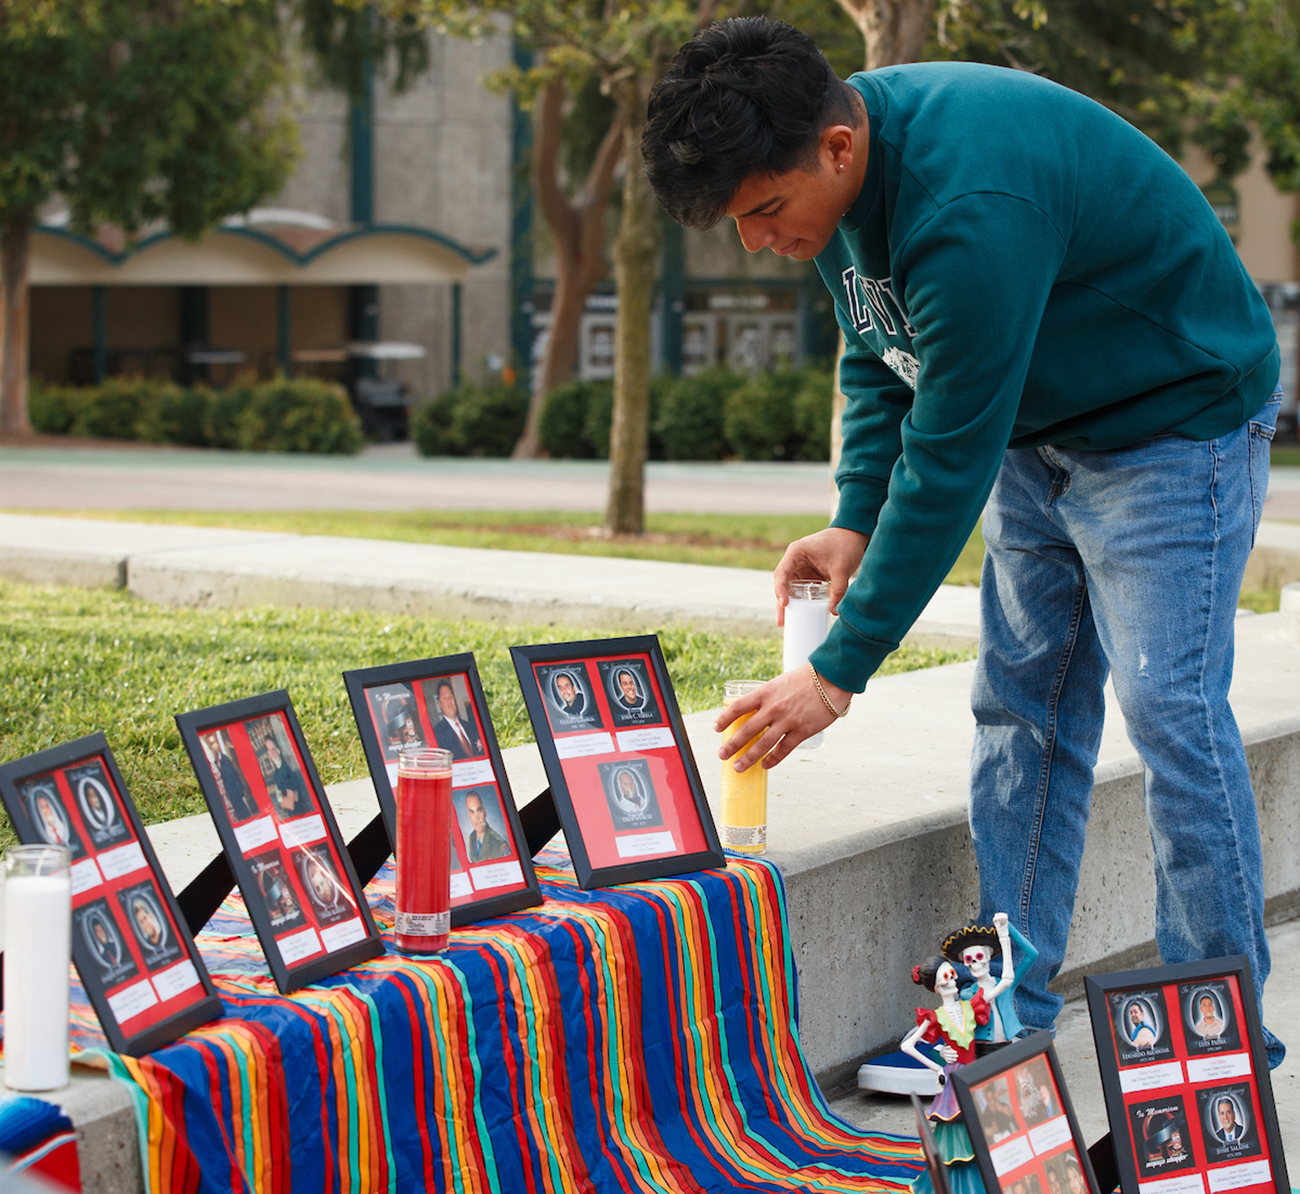 A young man places candles in front of framed photos at an outdoor ofrenda